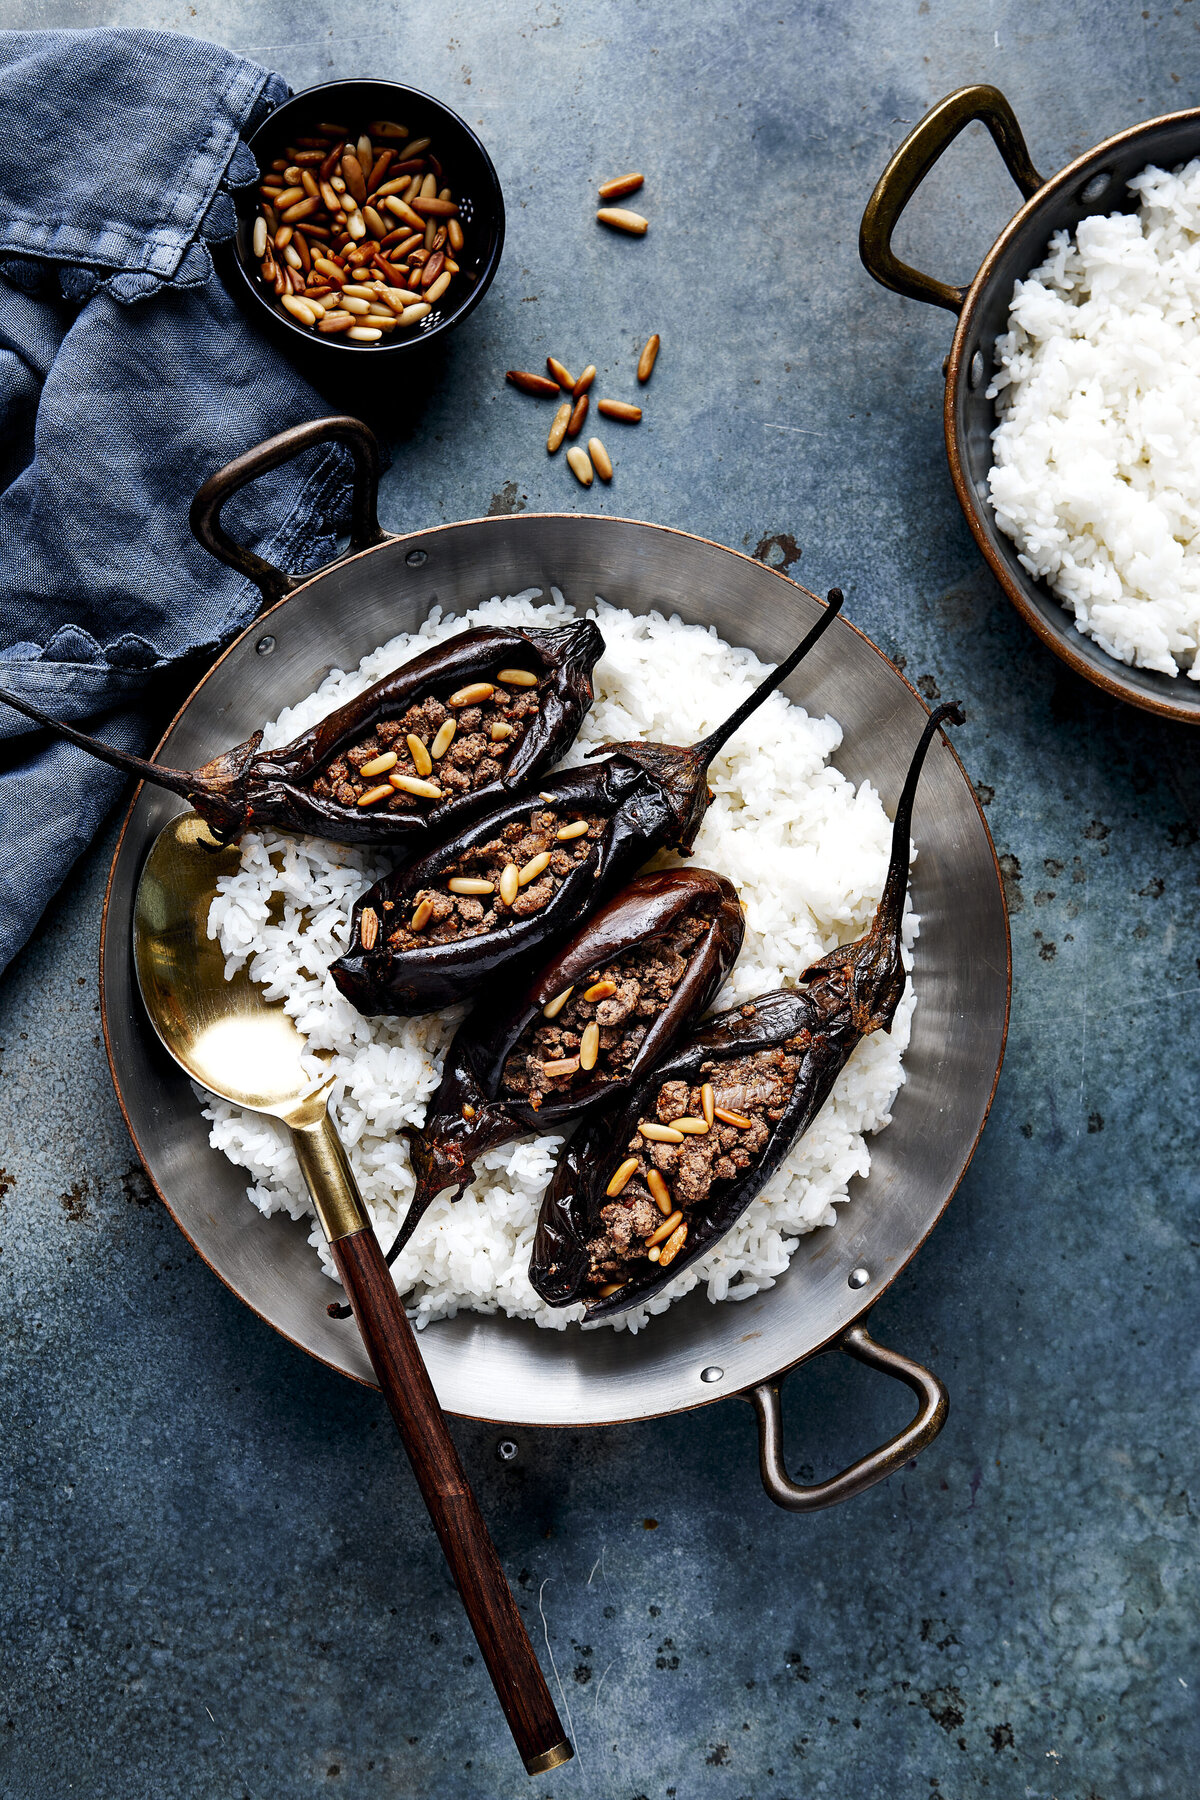 A metal wok with roasted eggplant and rice in it.